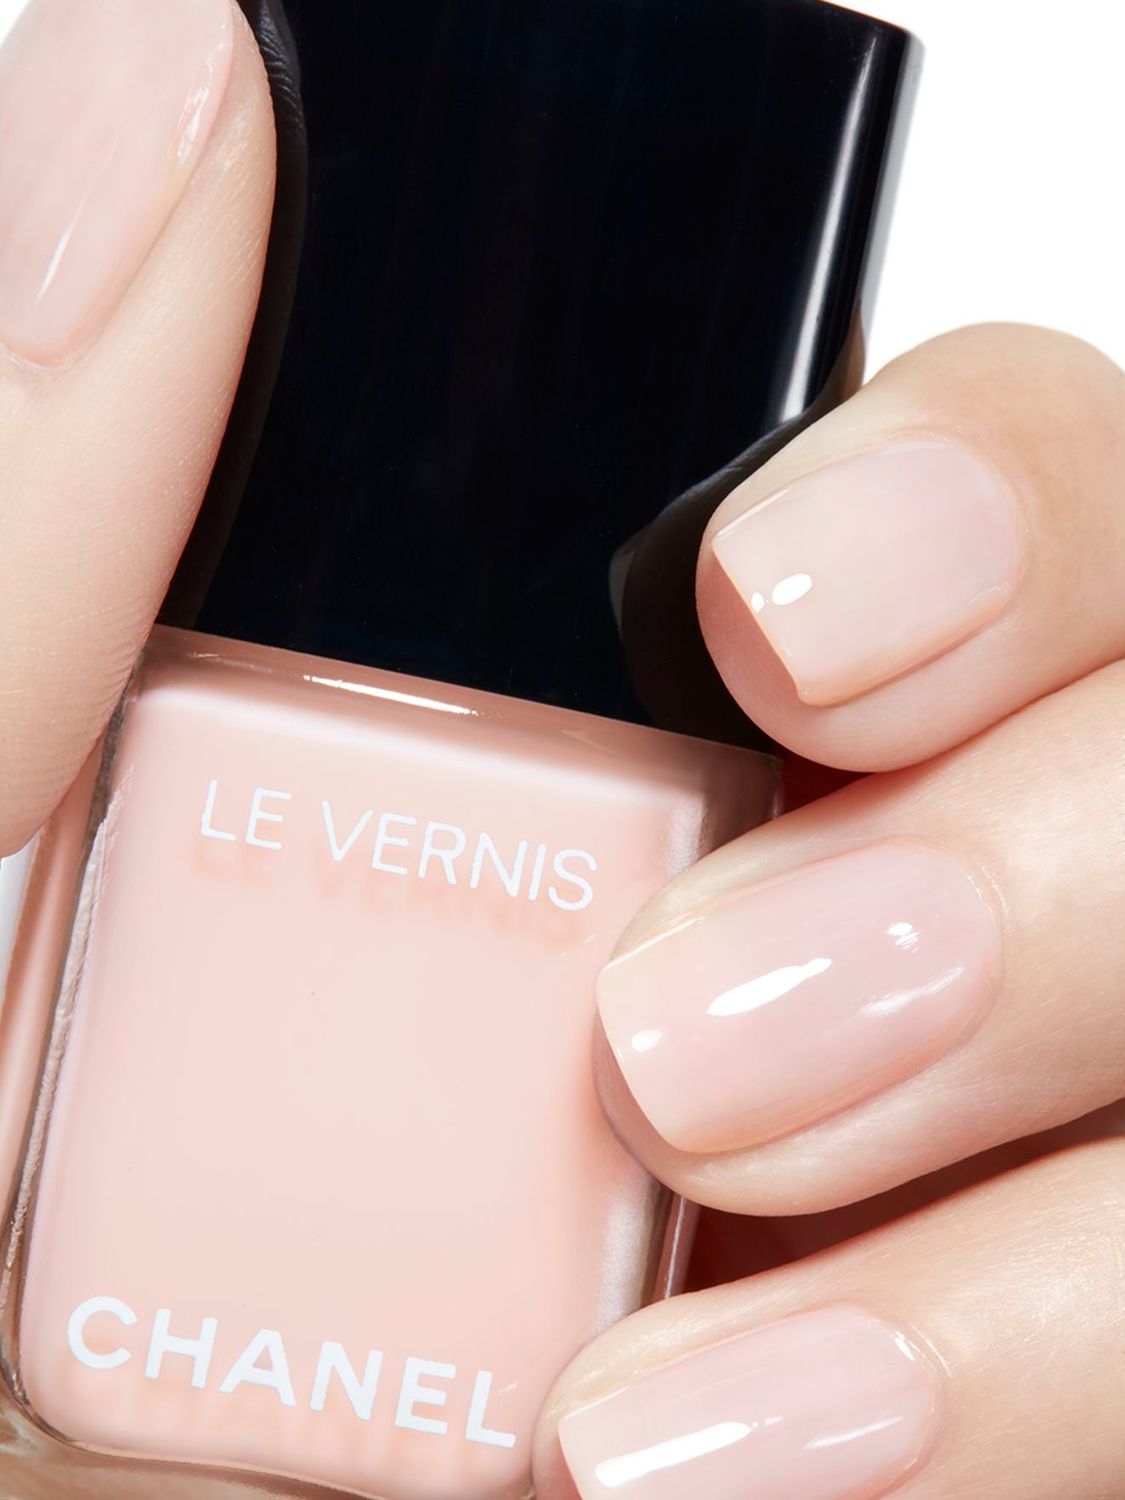 Chanel Le Vernis in Ballerina Review